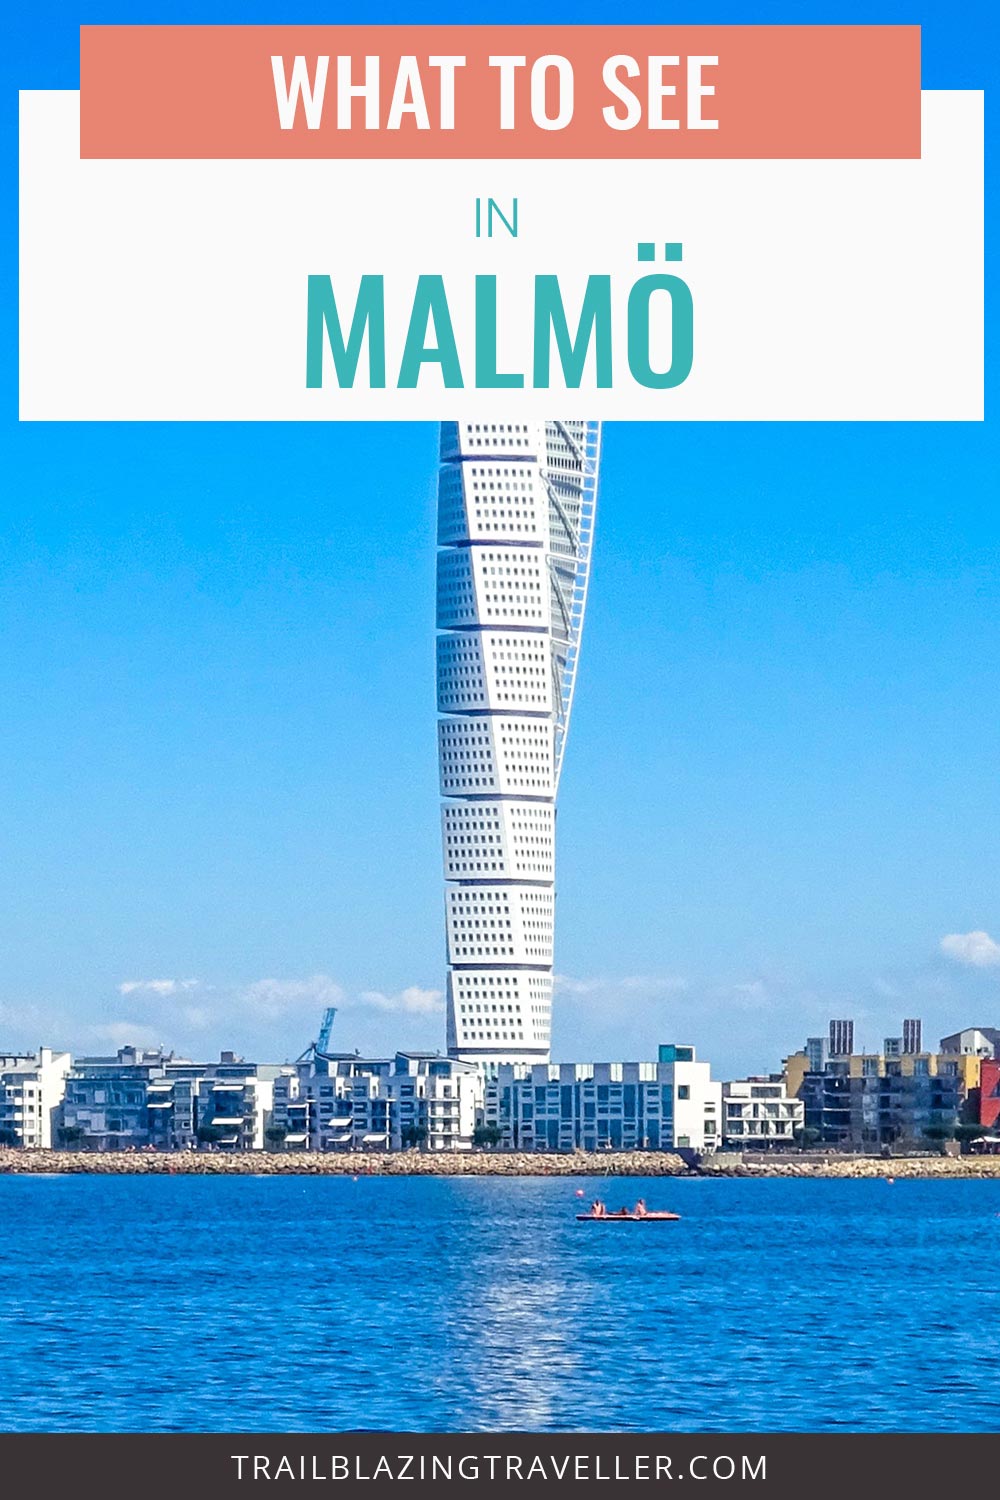 Turning Torso Tower - What To See In Malmö?